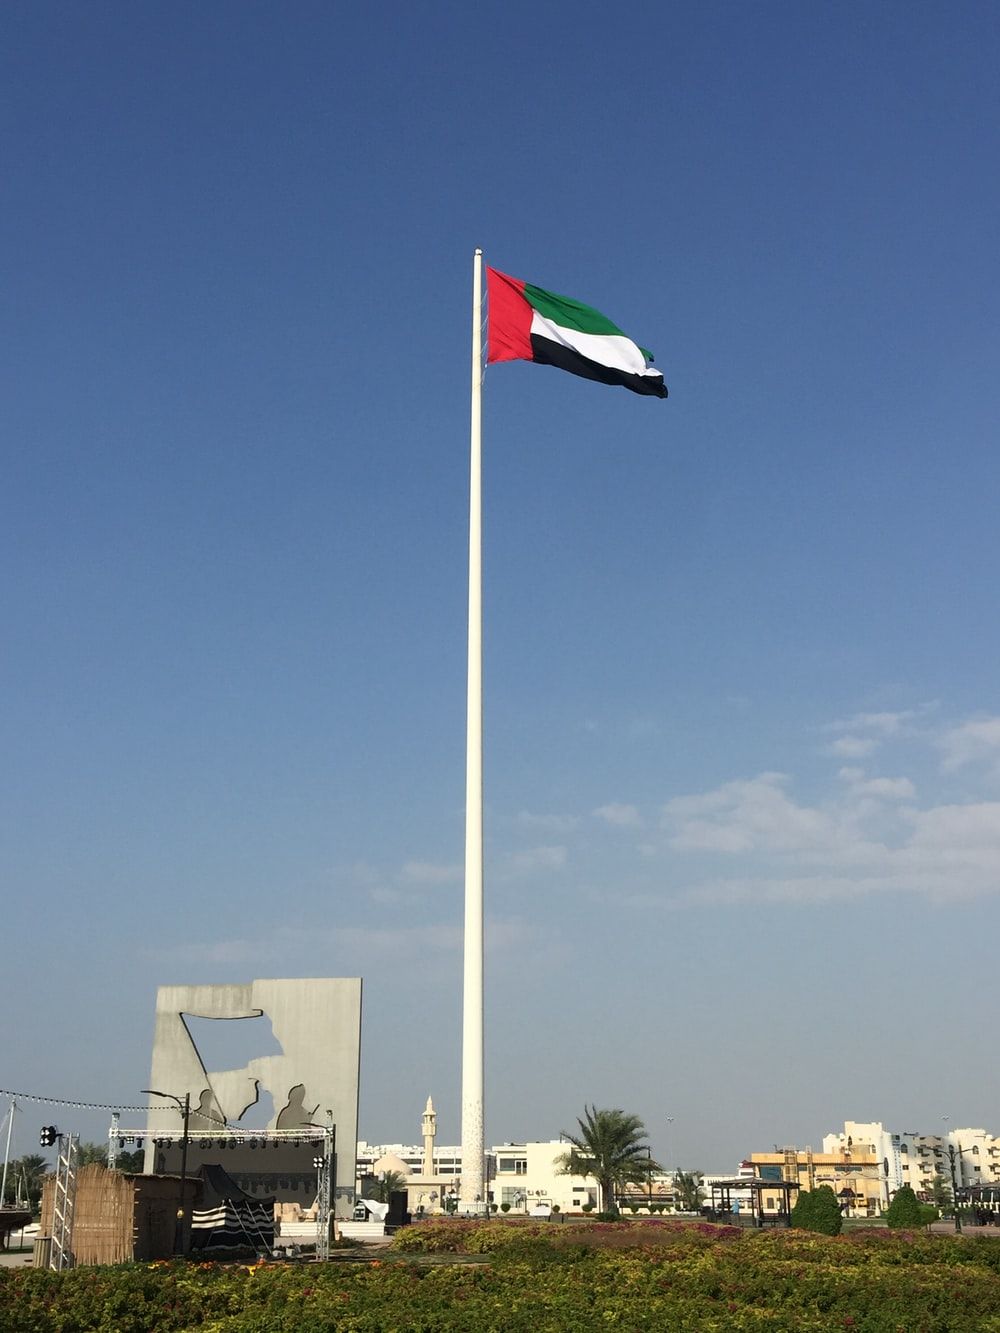 Uae Flag Picture. Download Free Image